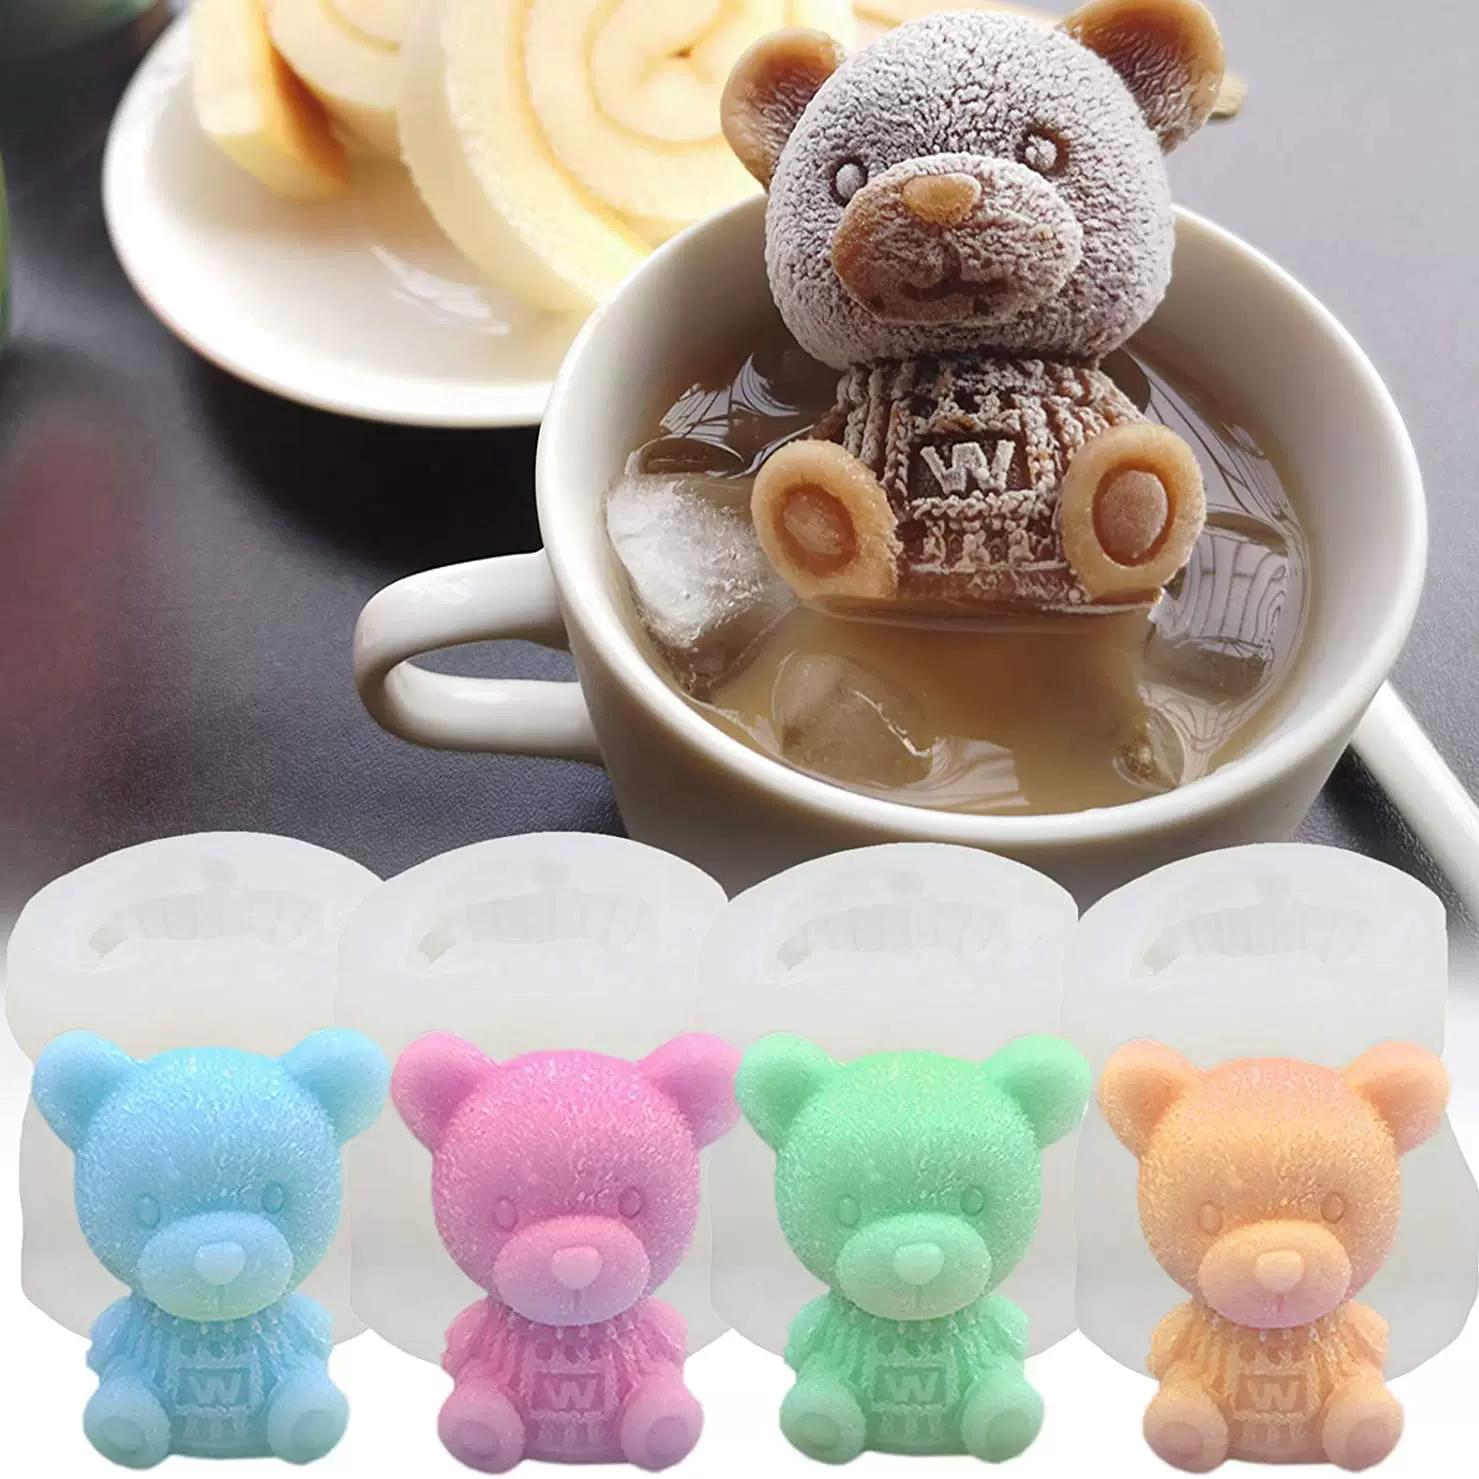 Travelwant Bear Ice Molds Ice Cube Trays Mold to Make Lovely 3D